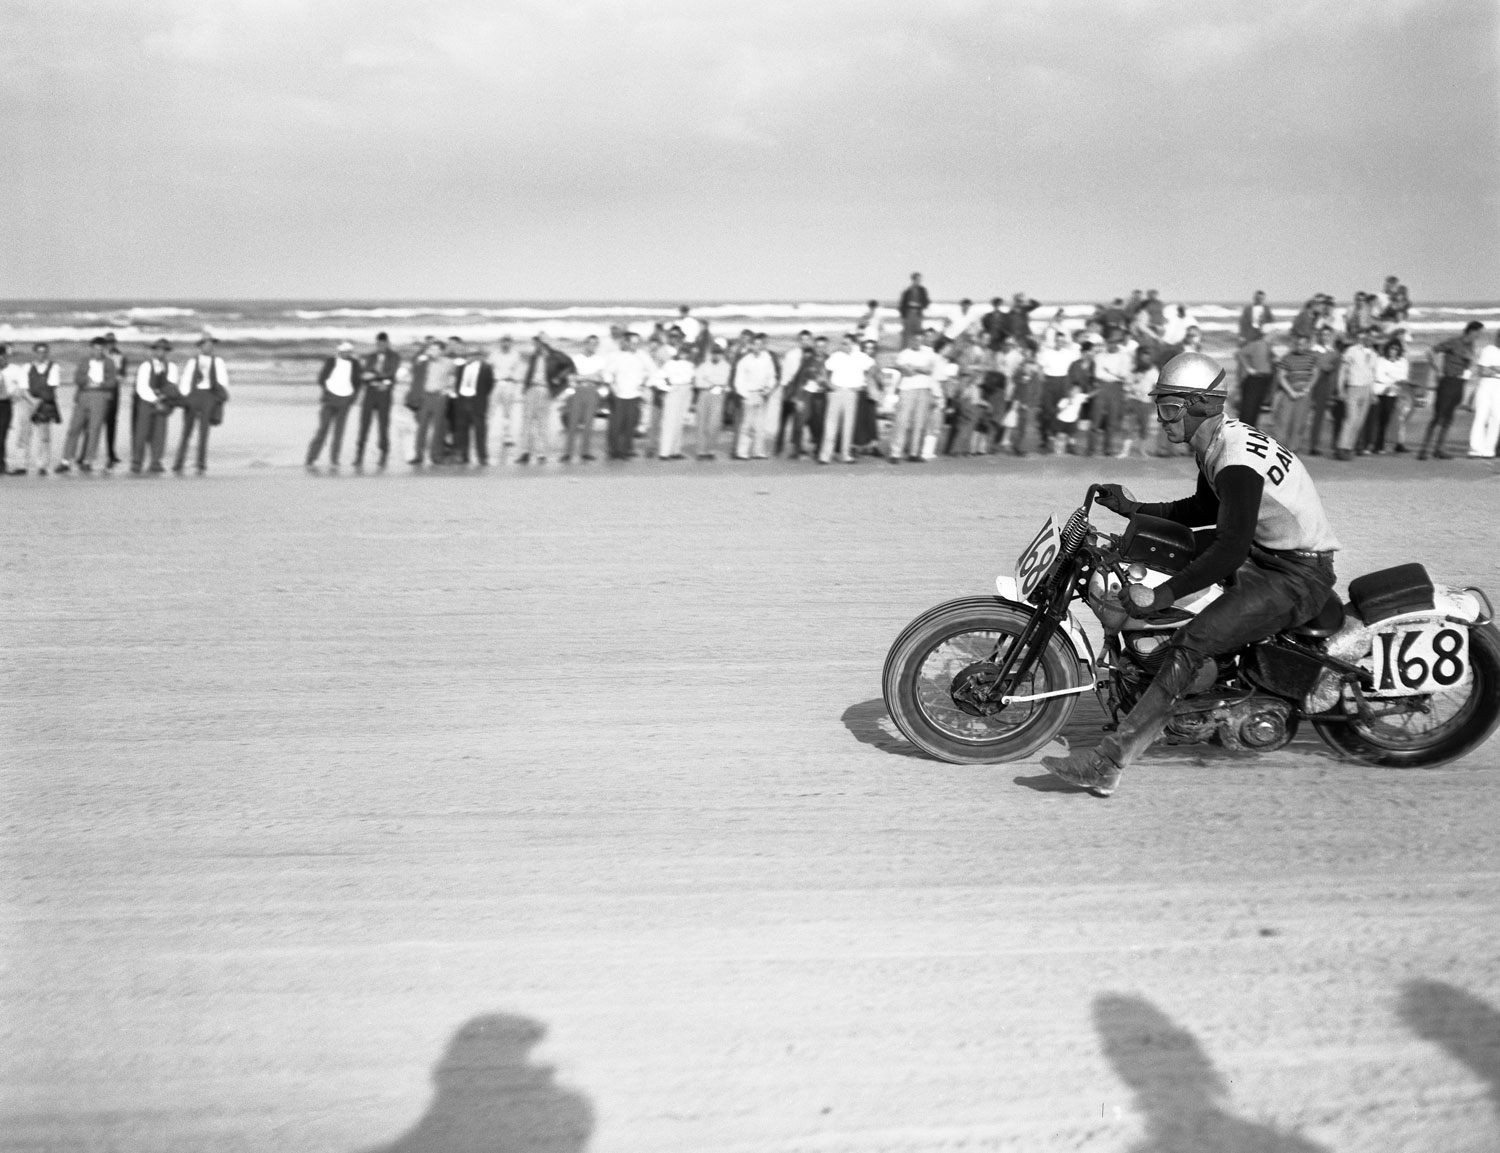 His leg outstretched for balance, a racer (number 168) steers his motorcycle across the sand during the Daytona 200 motorcycle race, Daytona Beach, Florida, March 1948.